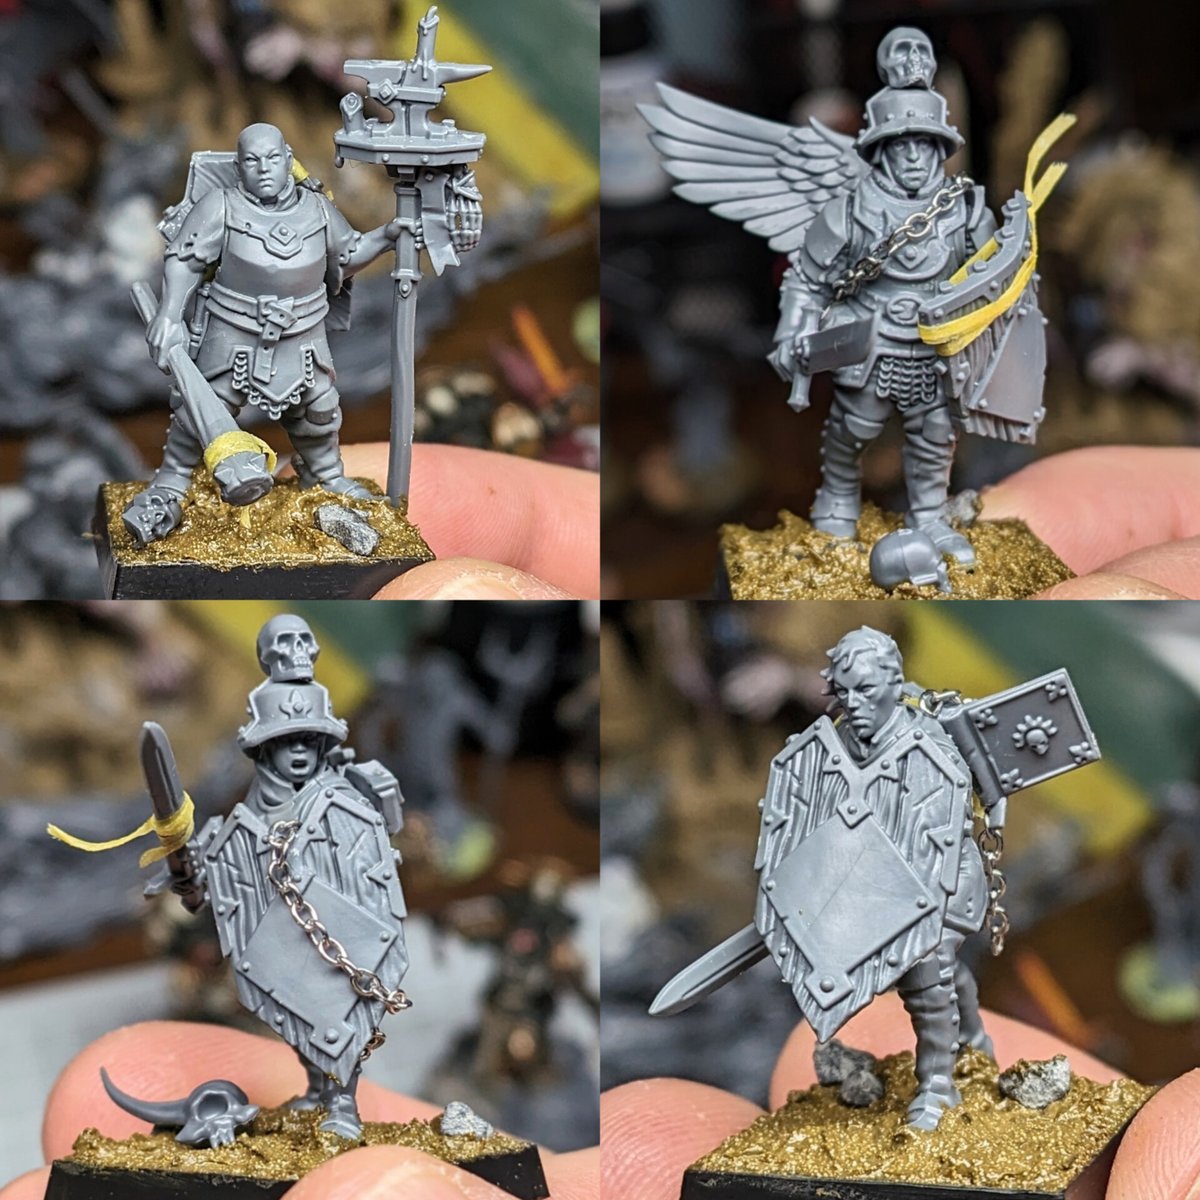 Since finishing the T'au I want to step away from personal 40k projects for a bit. With that, I'm kitbashing an Old World Border Princes force, going with a more churchy, redemption arc style for the army.

#warhammercommunity